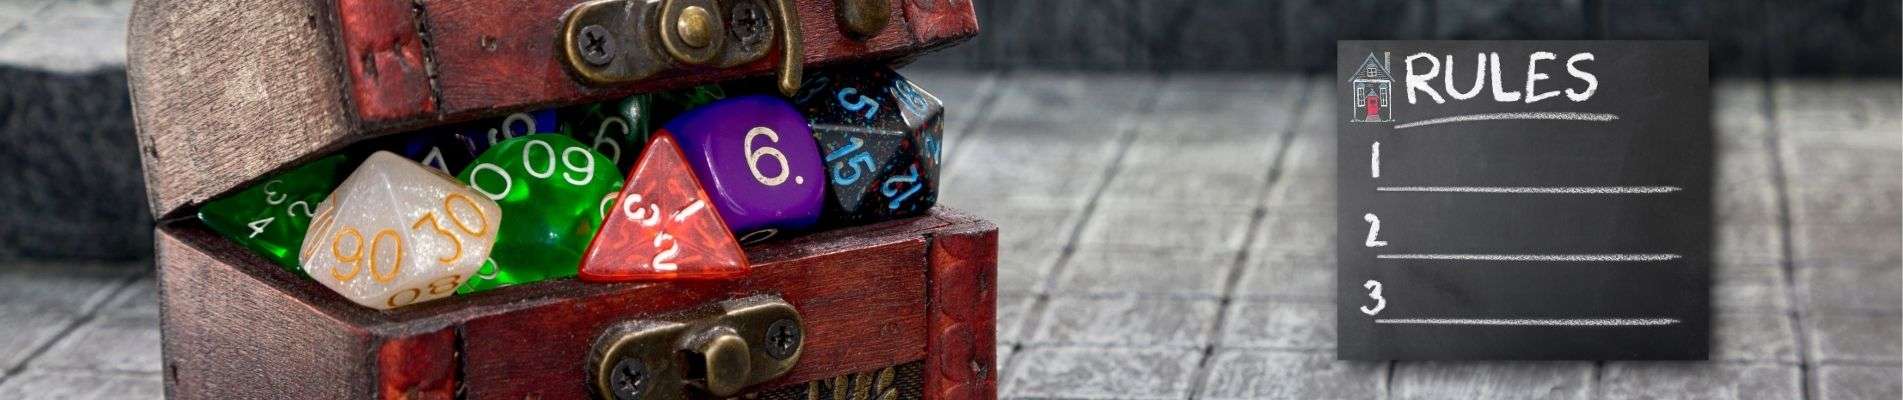 DnD House Rules Featured Image. Chest full of dice.